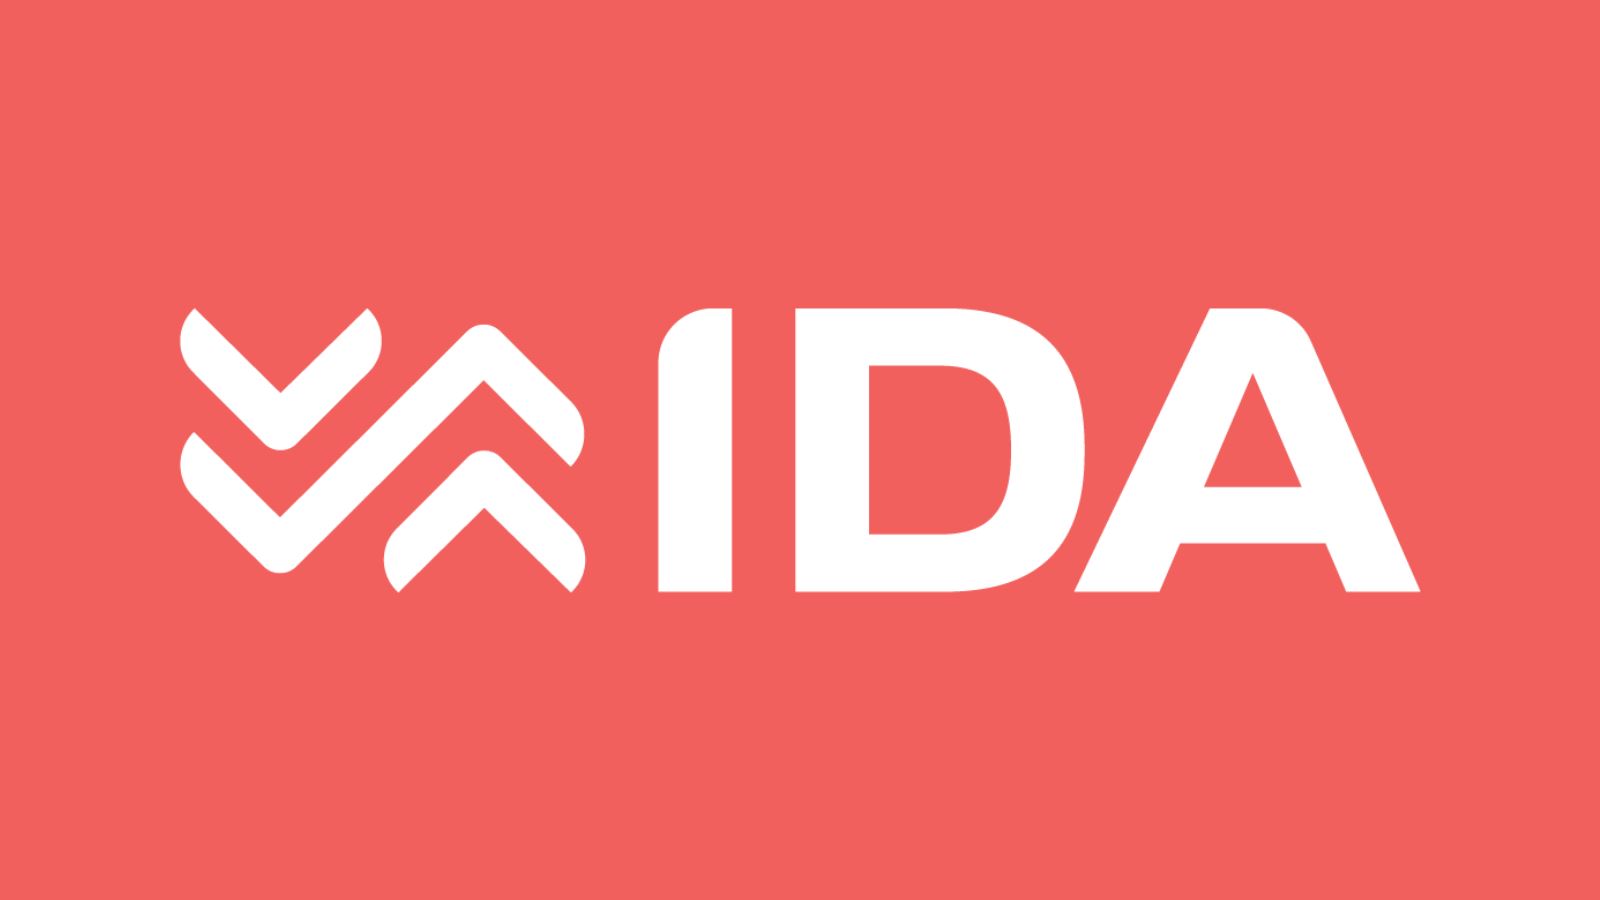 OFFICIAL RELEASE: IDA SPORTS CELEBRATES THE 50TH ANNIVERSARY OF